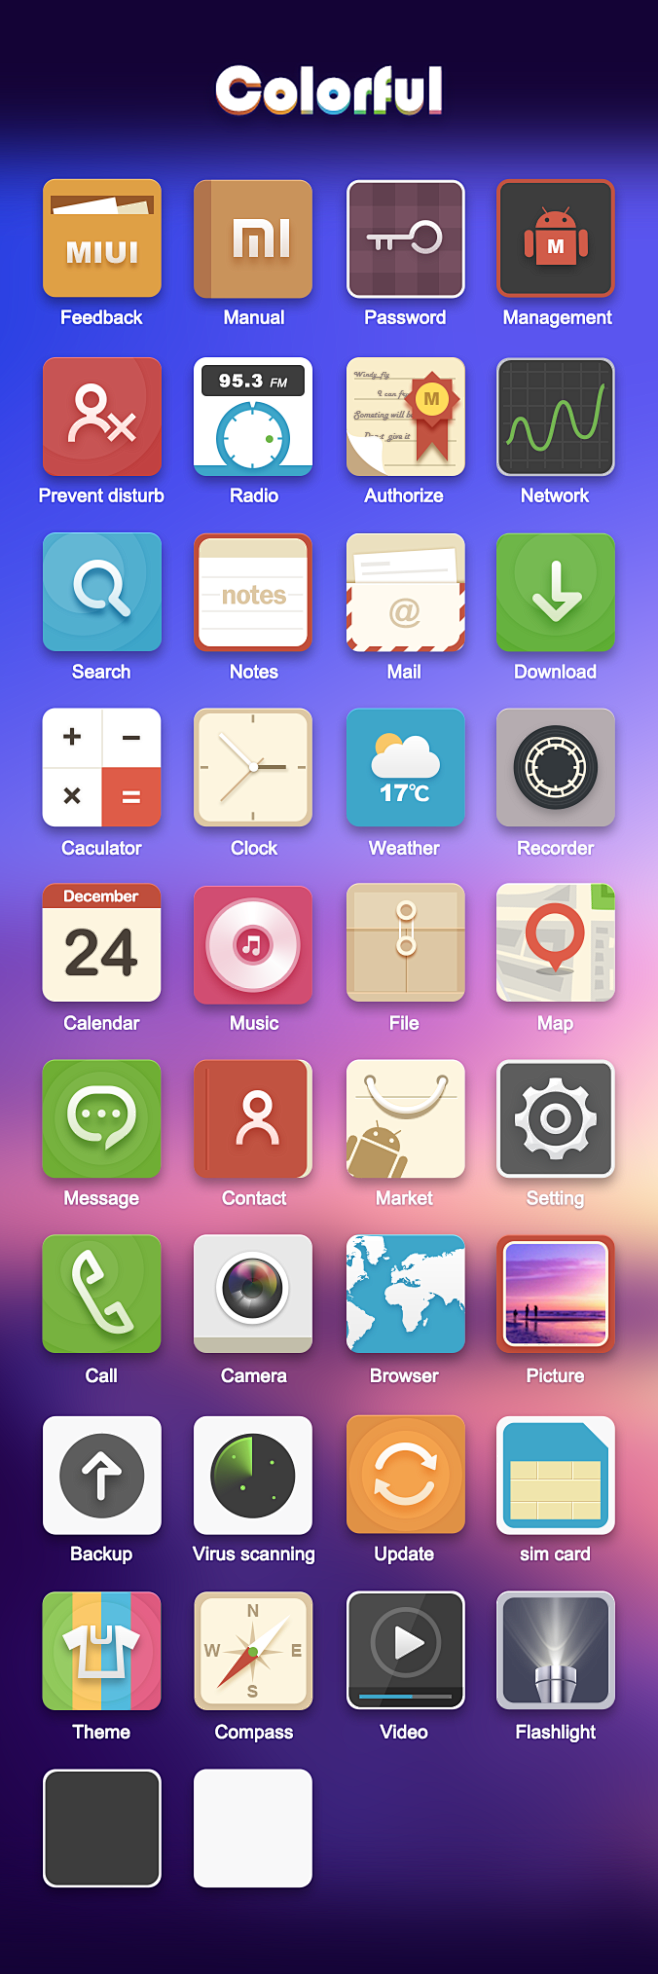 Colorful for MIUI V5...